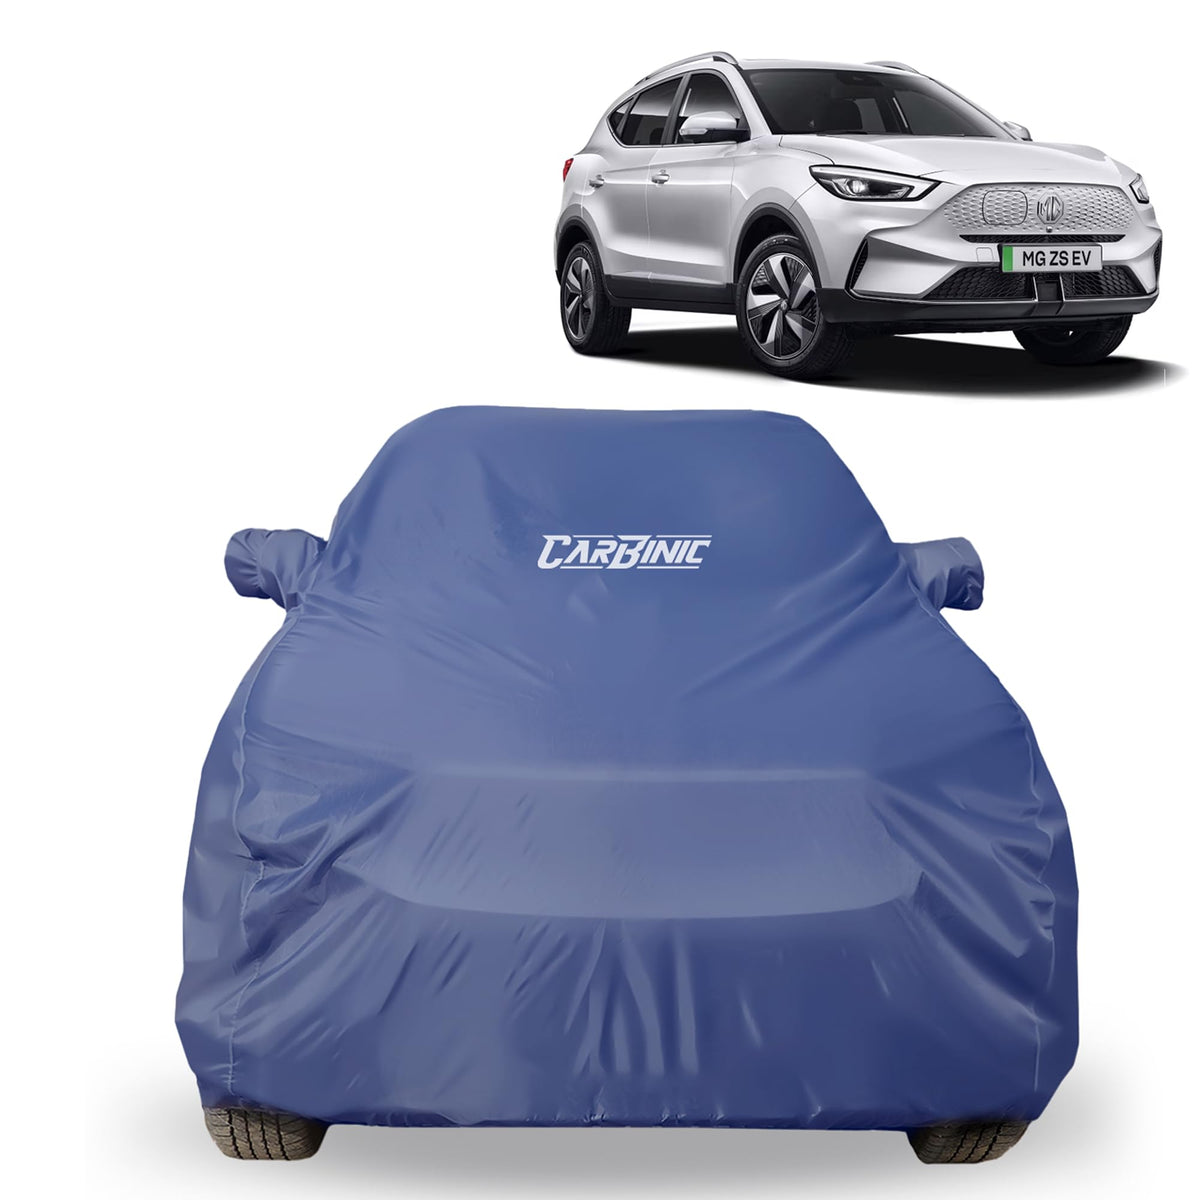 CARBINIC Car Body Cover for MG ZS EV 2022 | Water Resistant, UV Protection Car Cover | Scratchproof Body Shield | All-Weather Cover | Mirror Pocket & Antenna | Car Accessories Dusk Blue